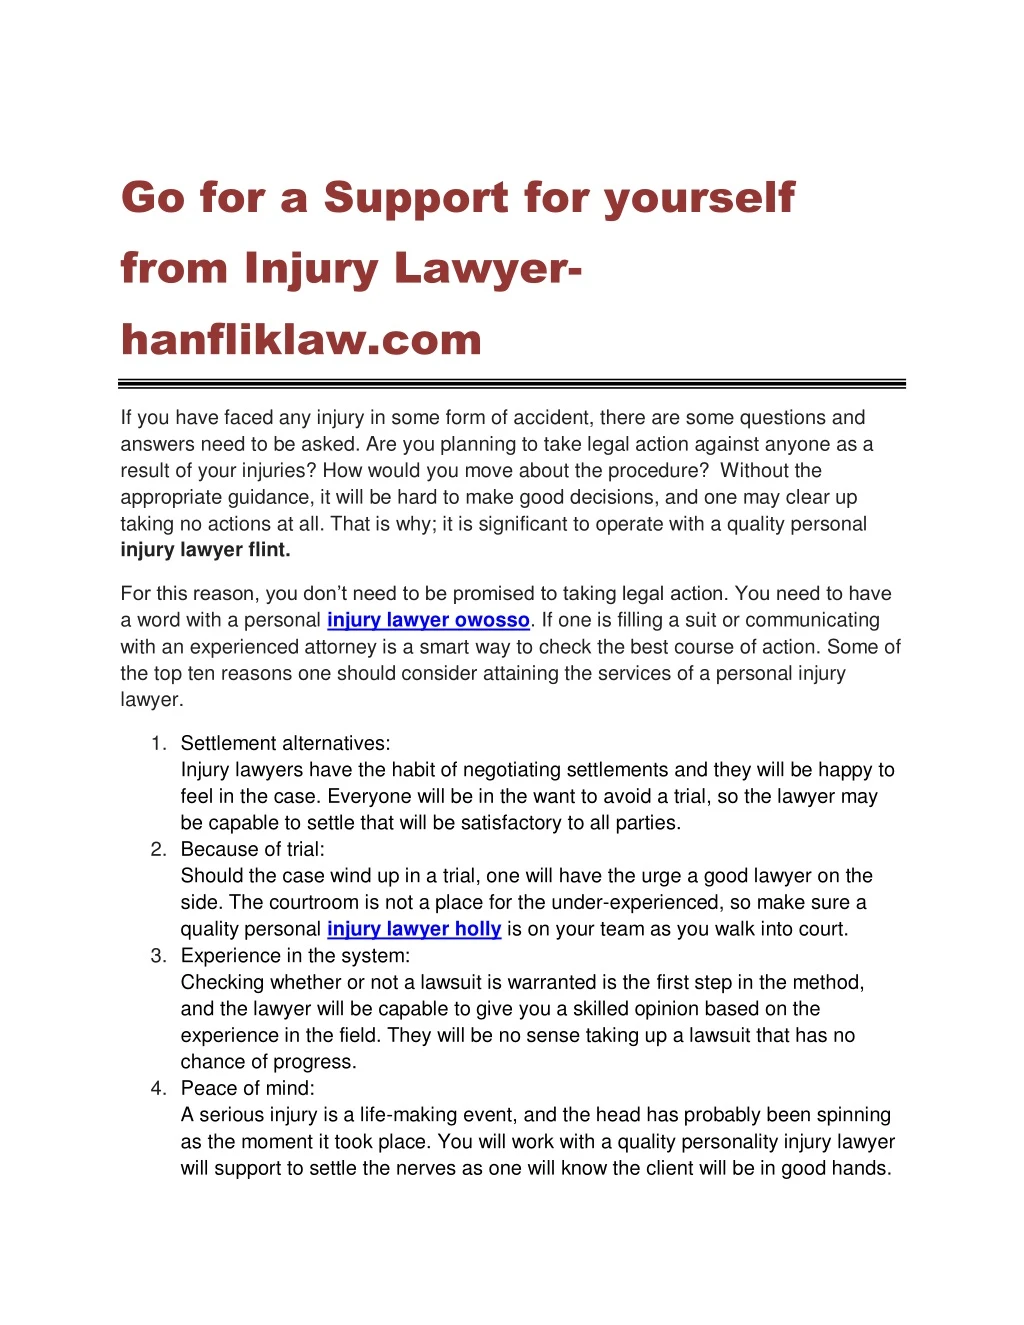 go for a support for yourself from injury lawyer